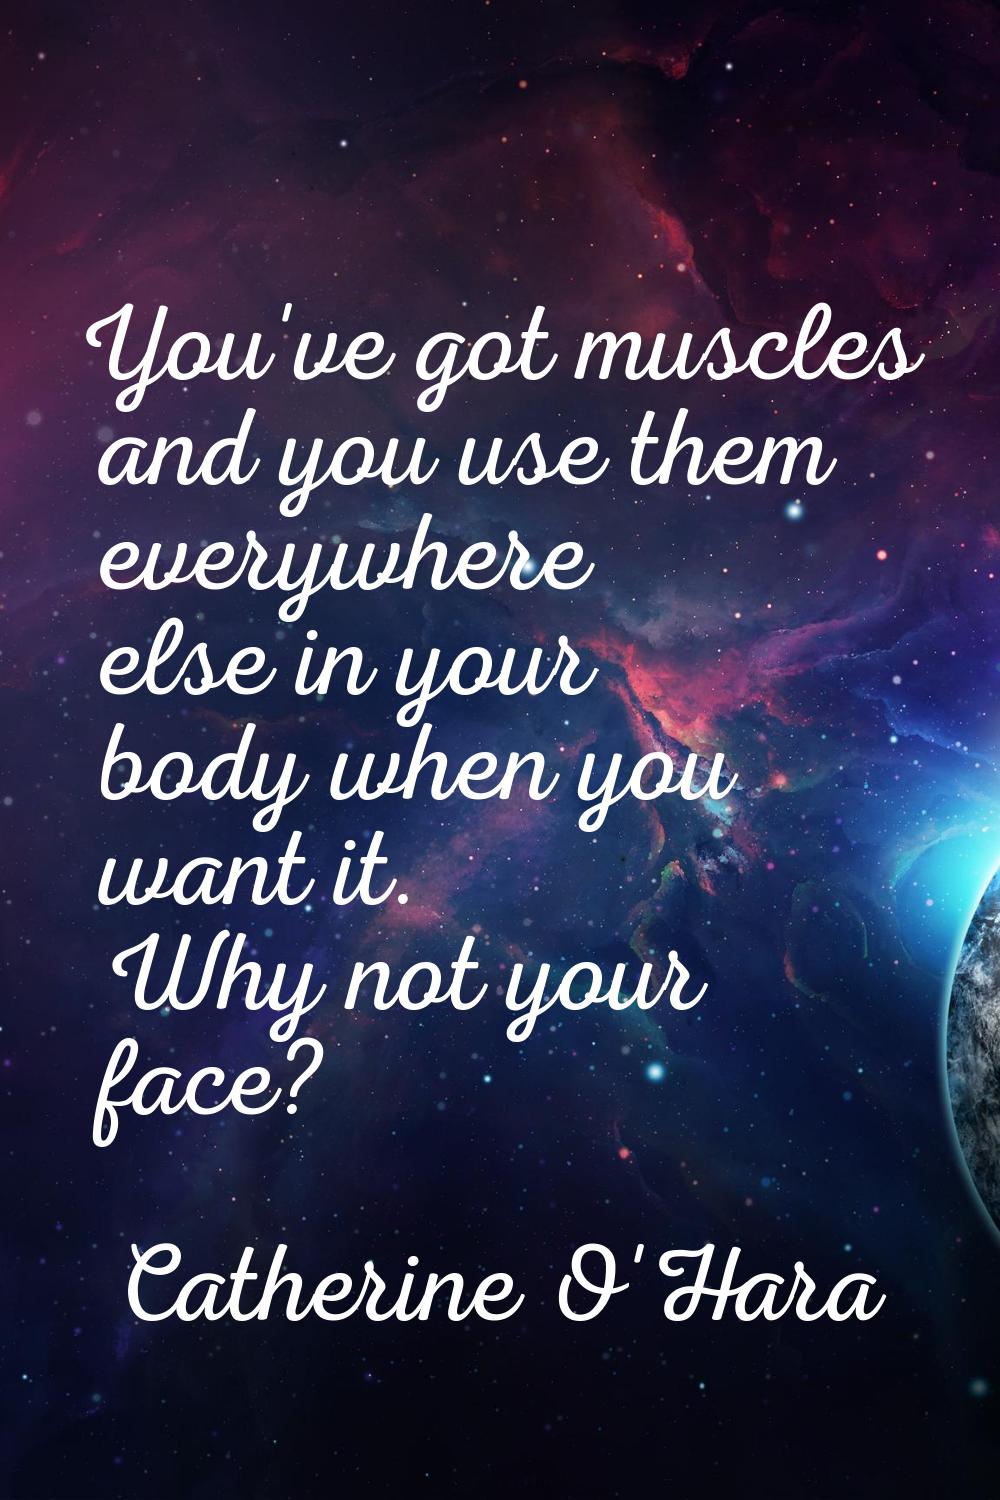 You've got muscles and you use them everywhere else in your body when you want it. Why not your fac